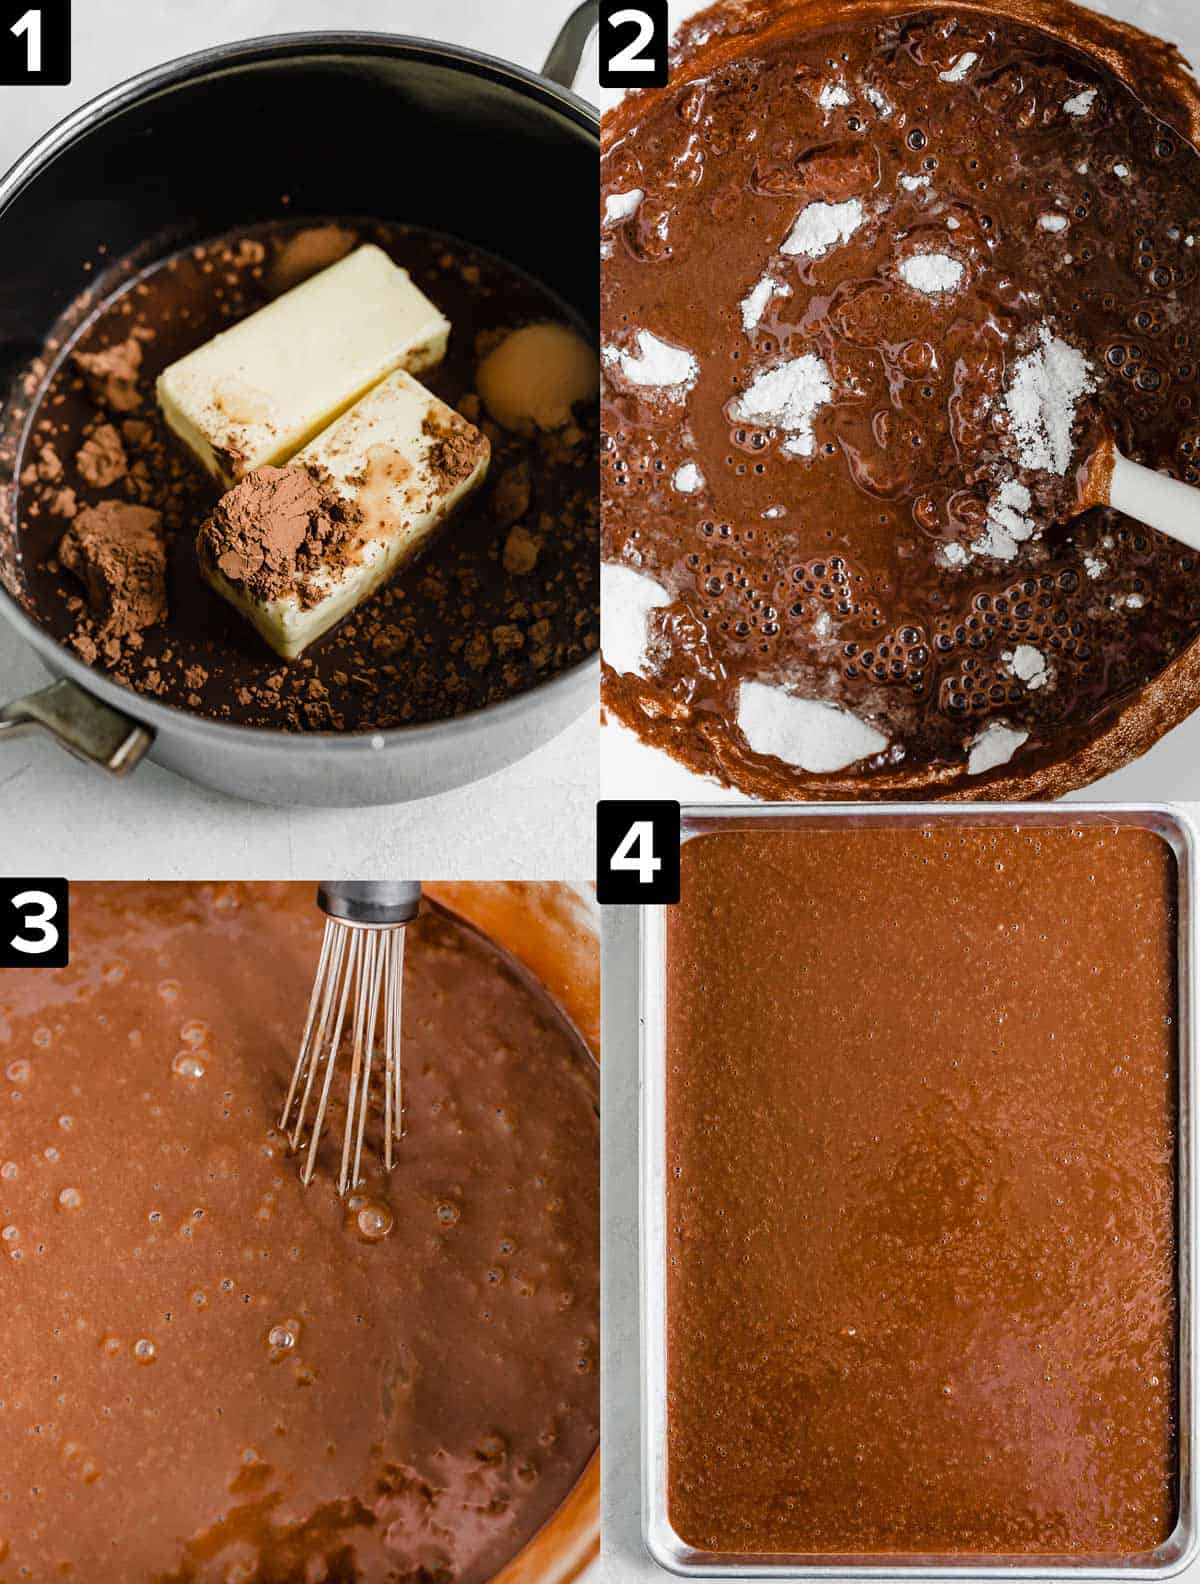 Four images showing how to make Texas Sheet Cake batter.